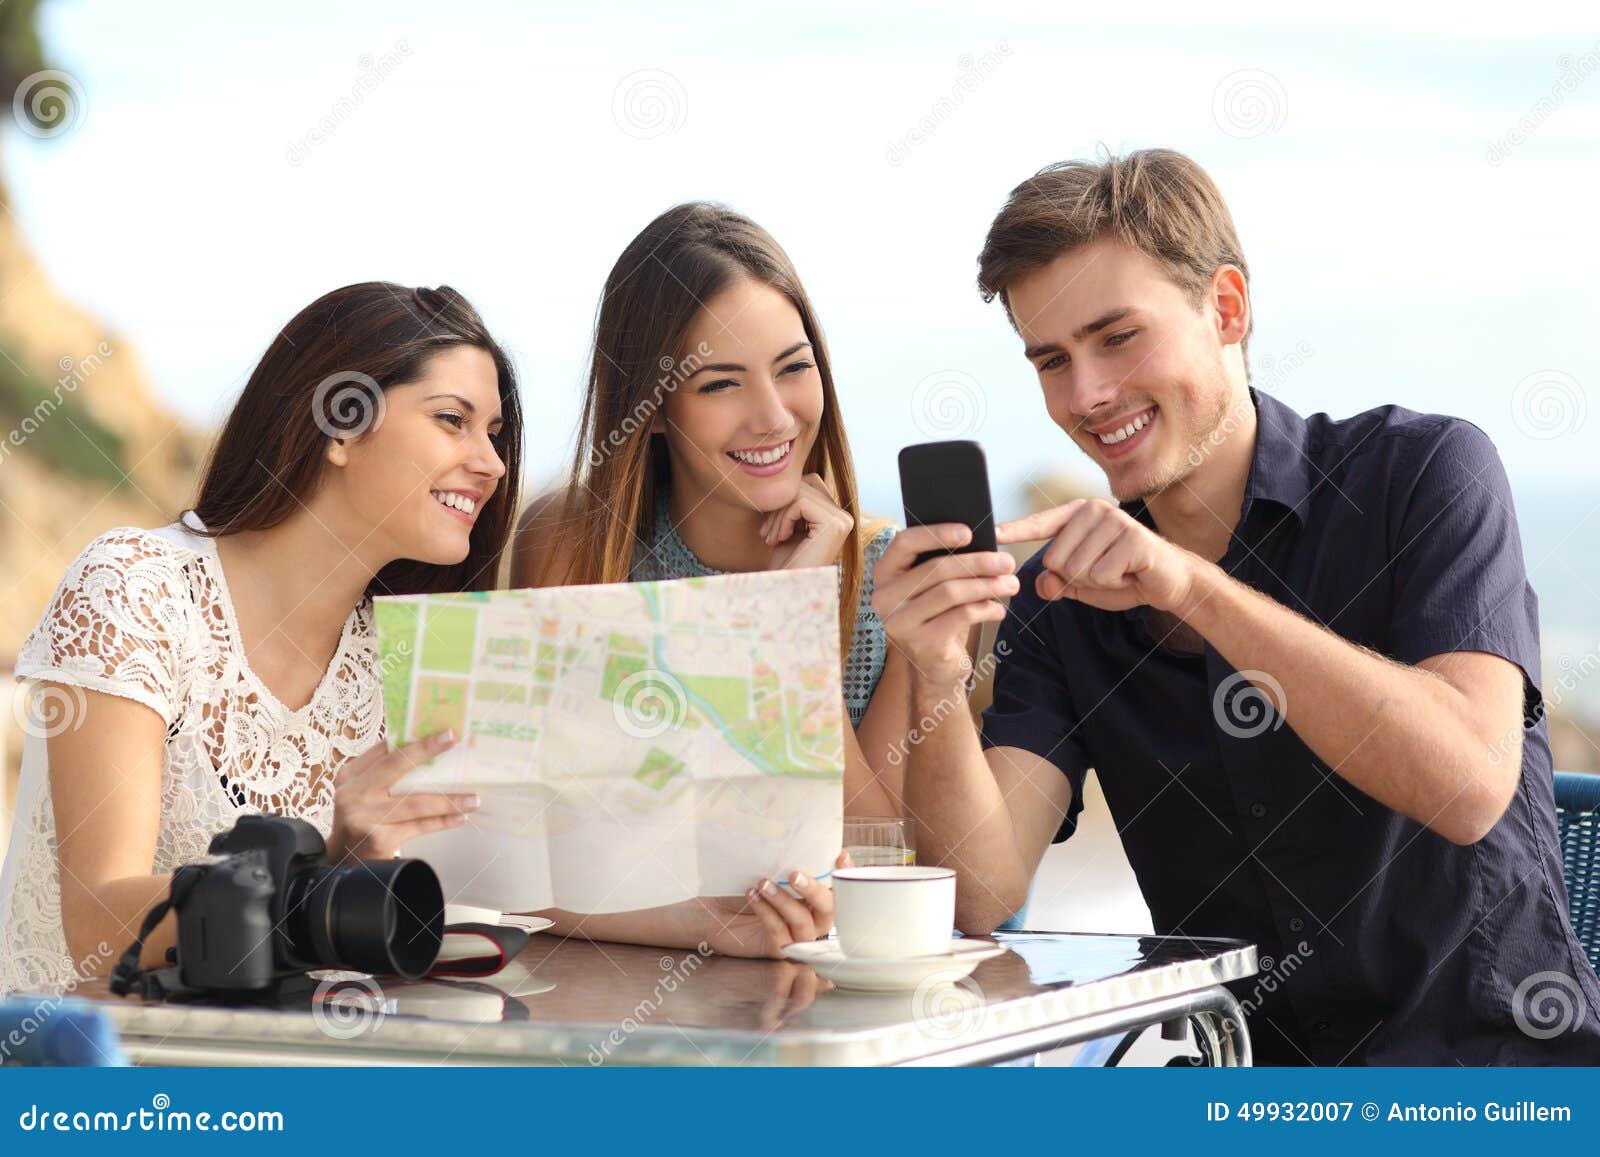 group of young tourist friends consulting gps map in a smart phone